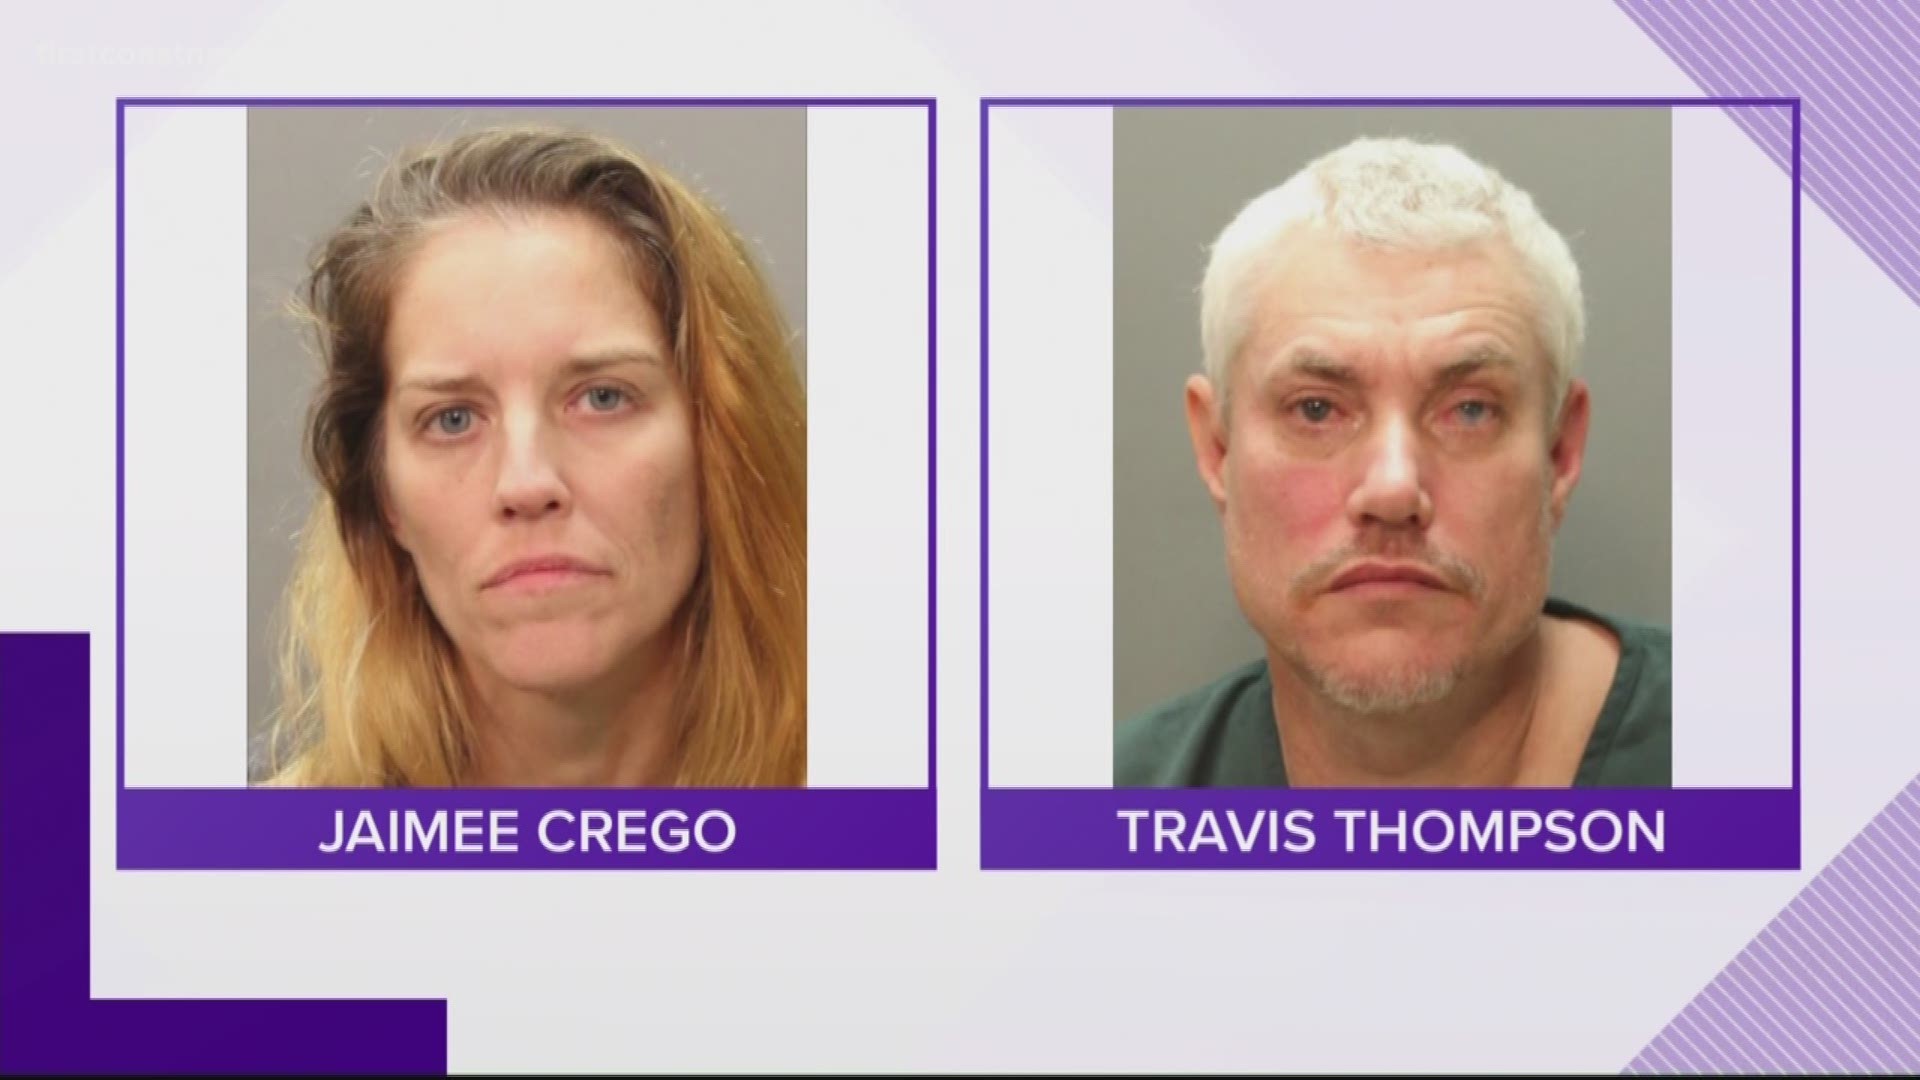 Travis Thompson and Jaimee Crego are wanted on charges of burglary and possession of burglary tools, according to JSO.